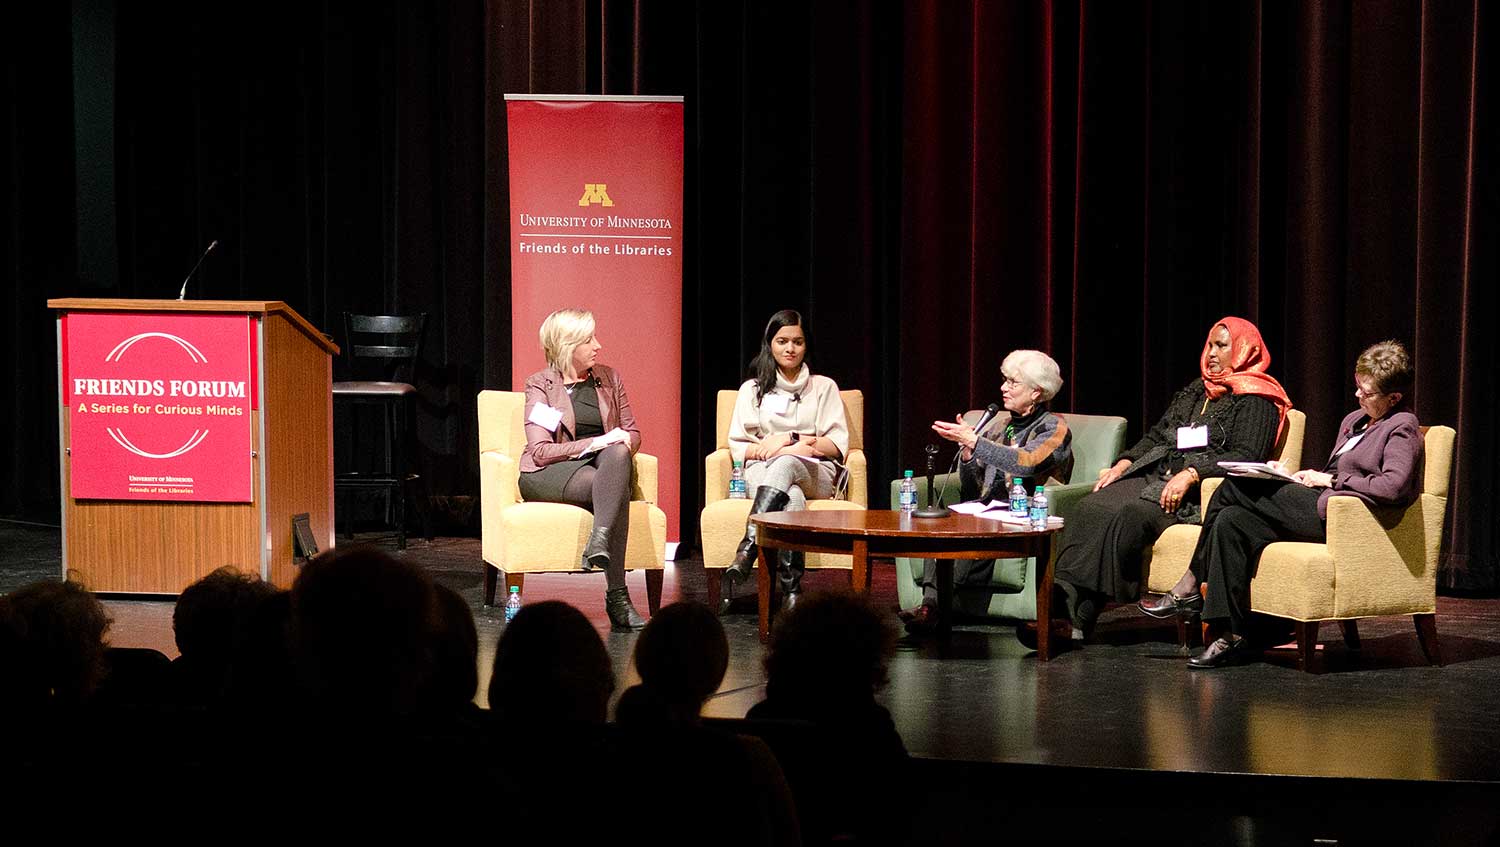 A panel of speakers at the Friends Forum event in 2018 in Coffman Theater.